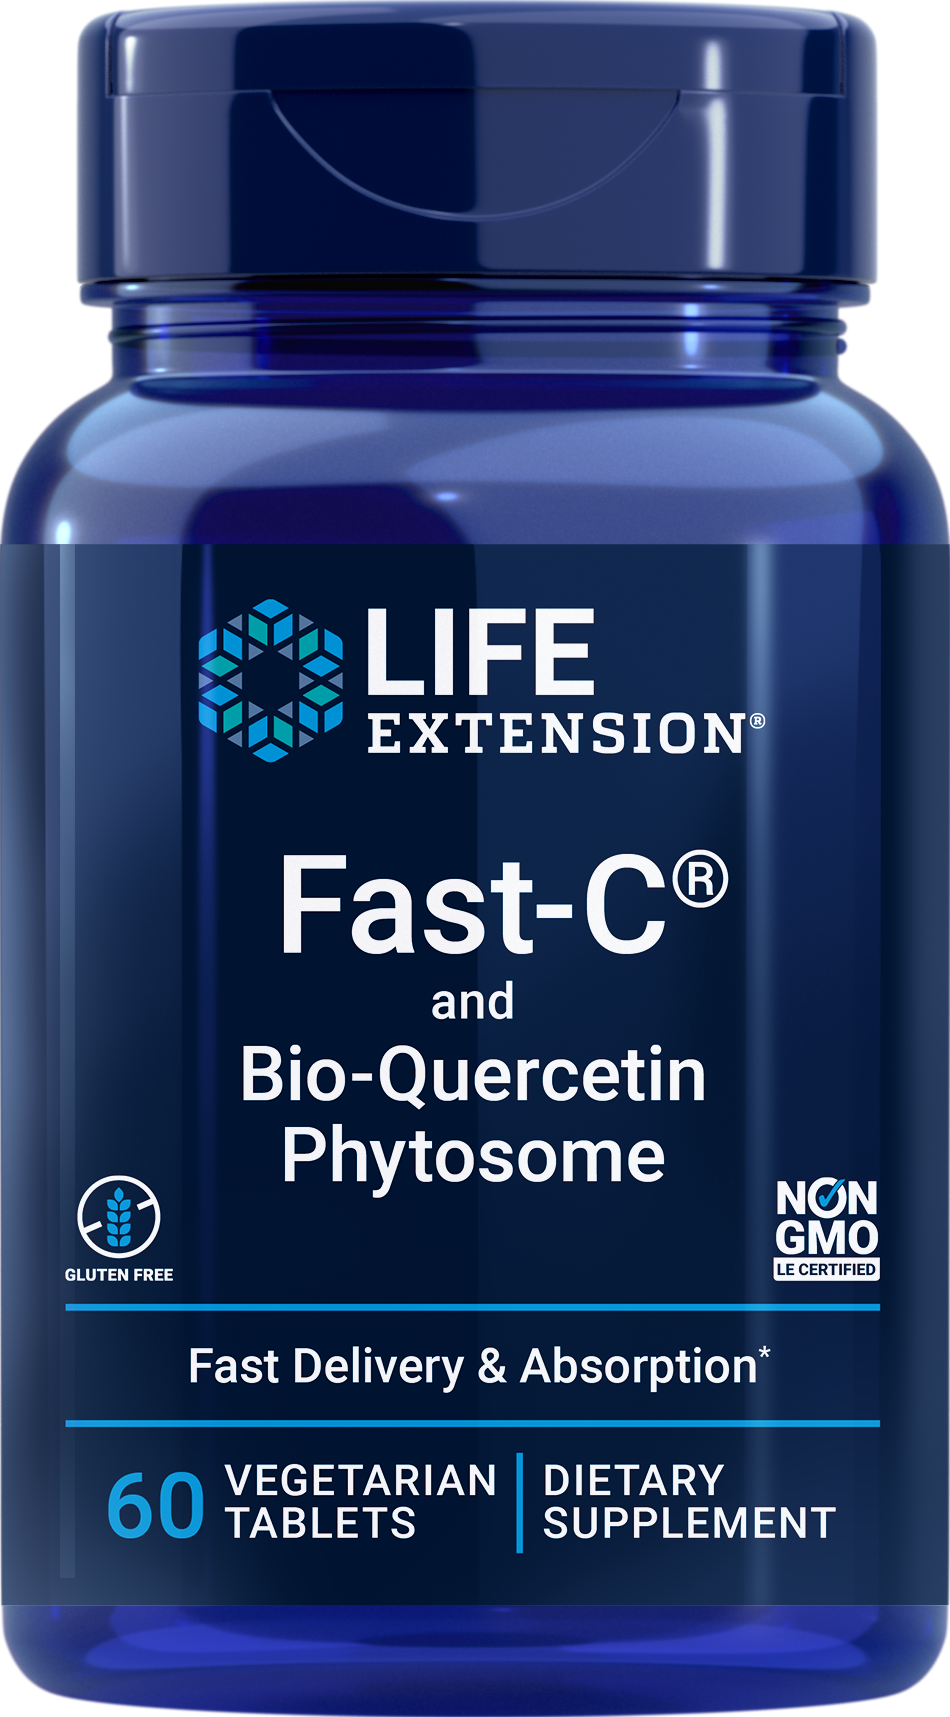 Fast-C® and Bio-Quercetin Phytosome